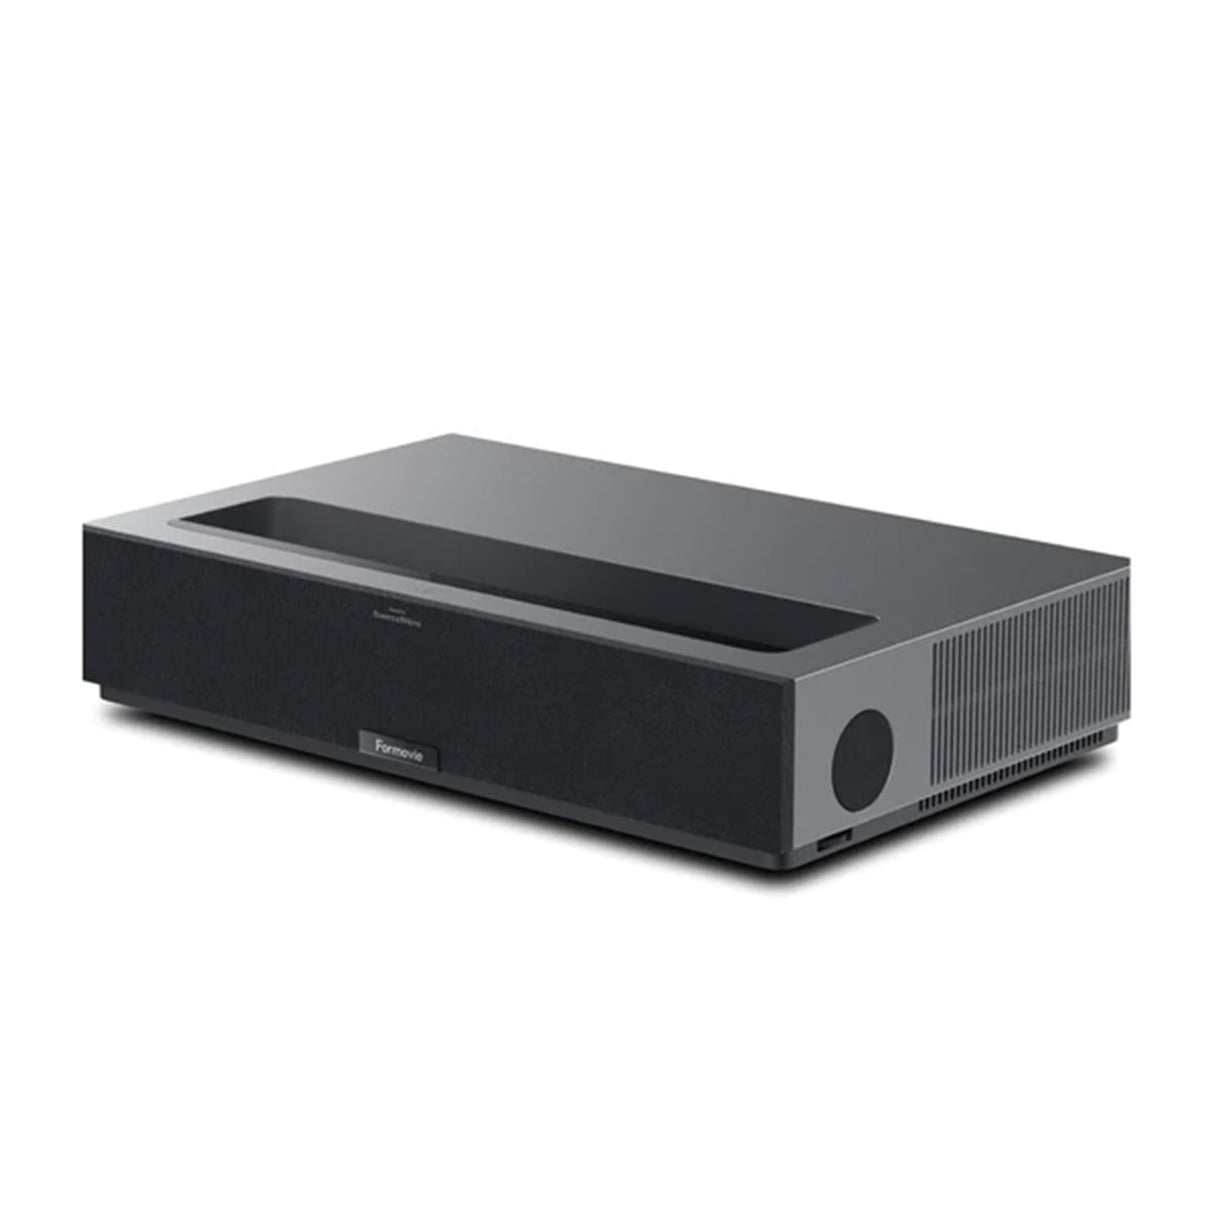 Formovie THEATER﻿ - 2800 Lumens Ultra Short Throw Laser Projector with Inbuilt Android TV